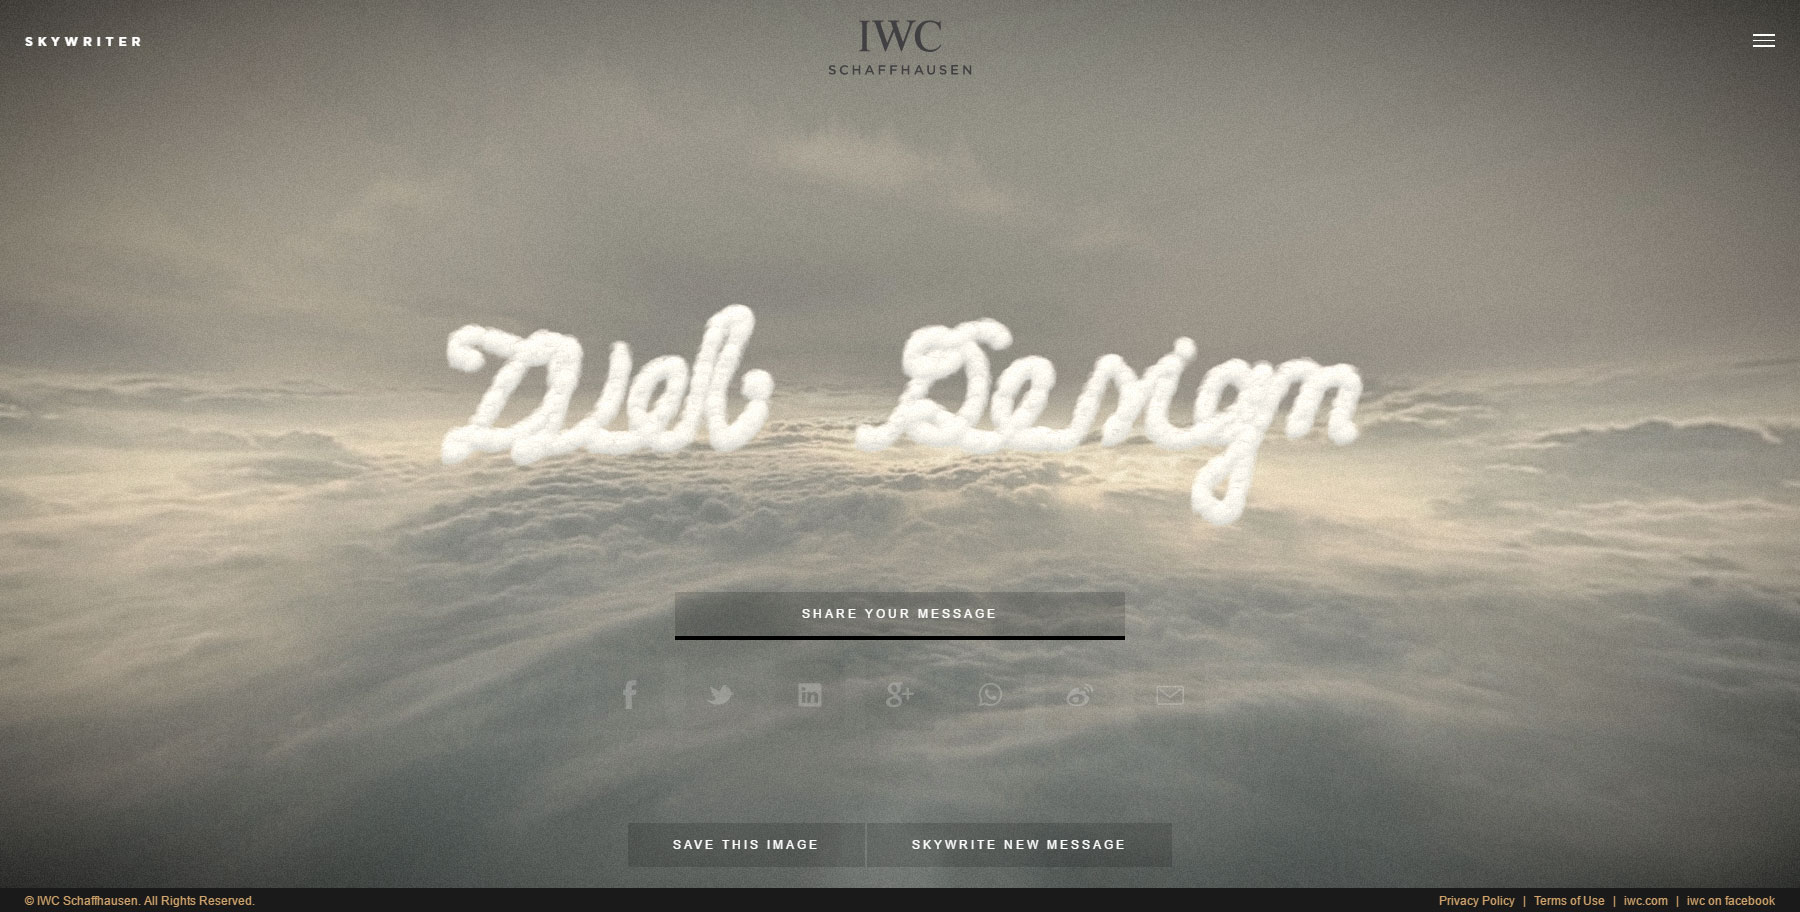 IWC Skywriter - Website of the Day